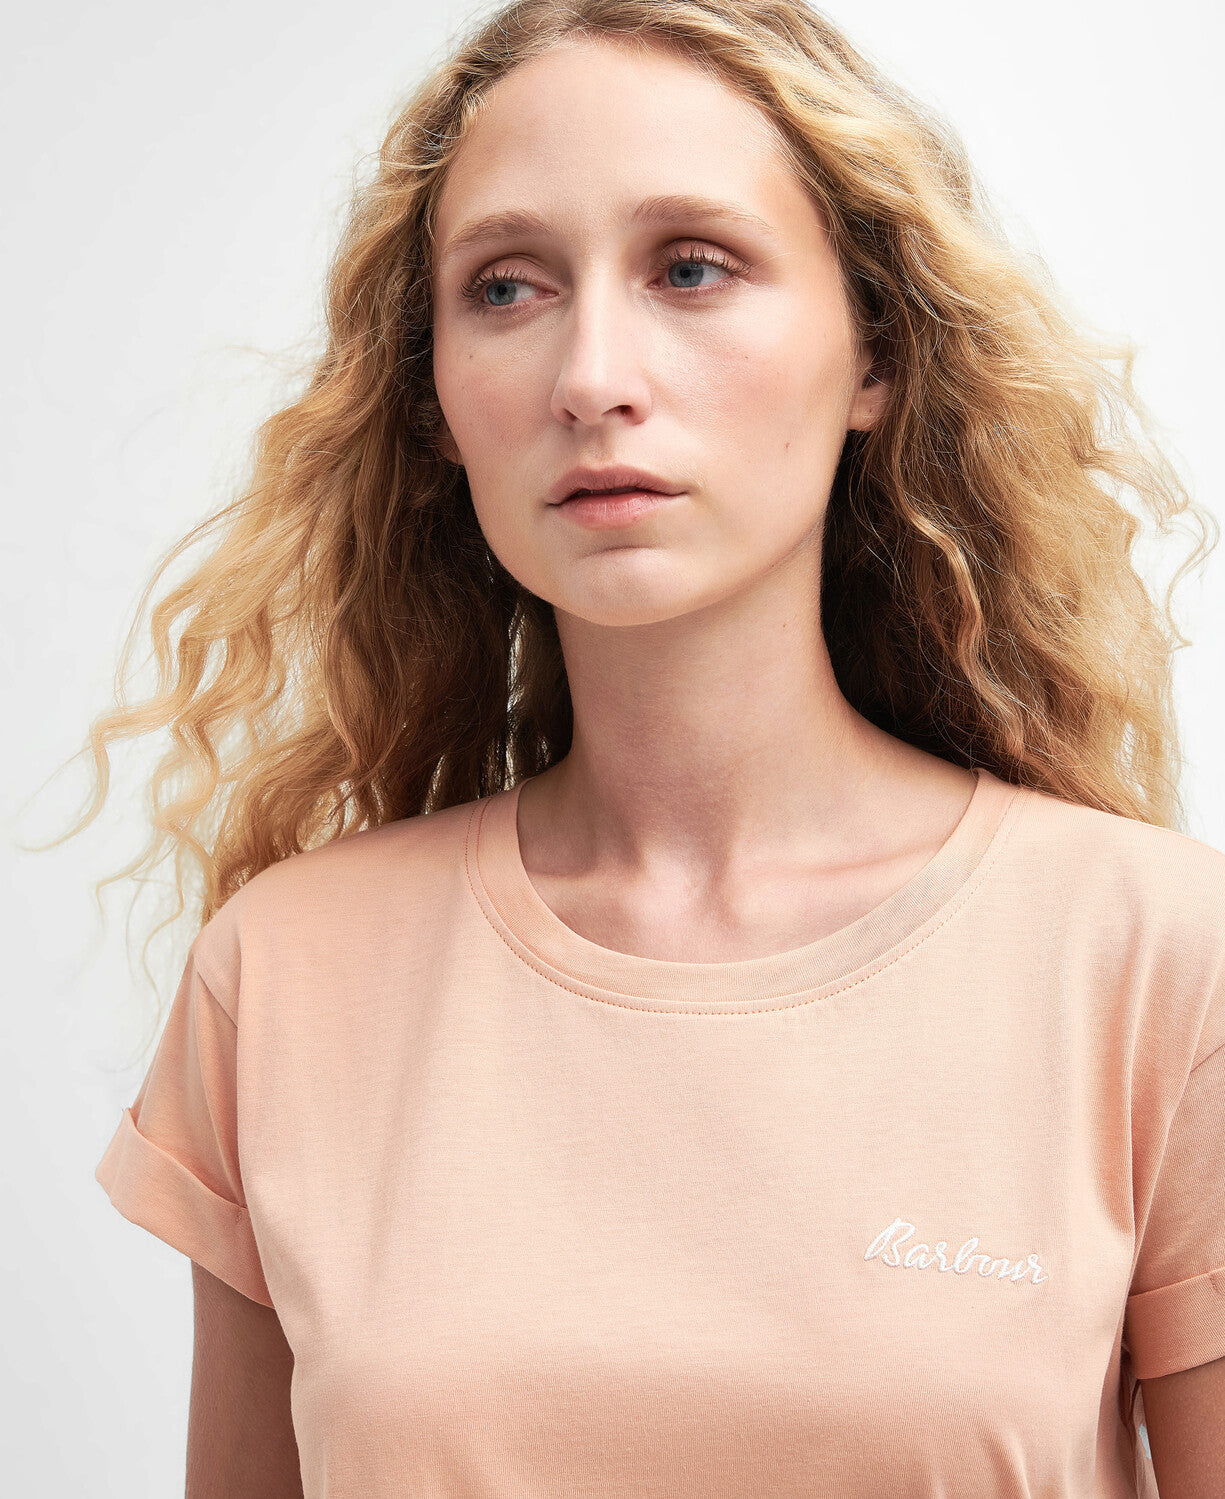 Barbour Kenmore T-Shirt - Soft Apricot